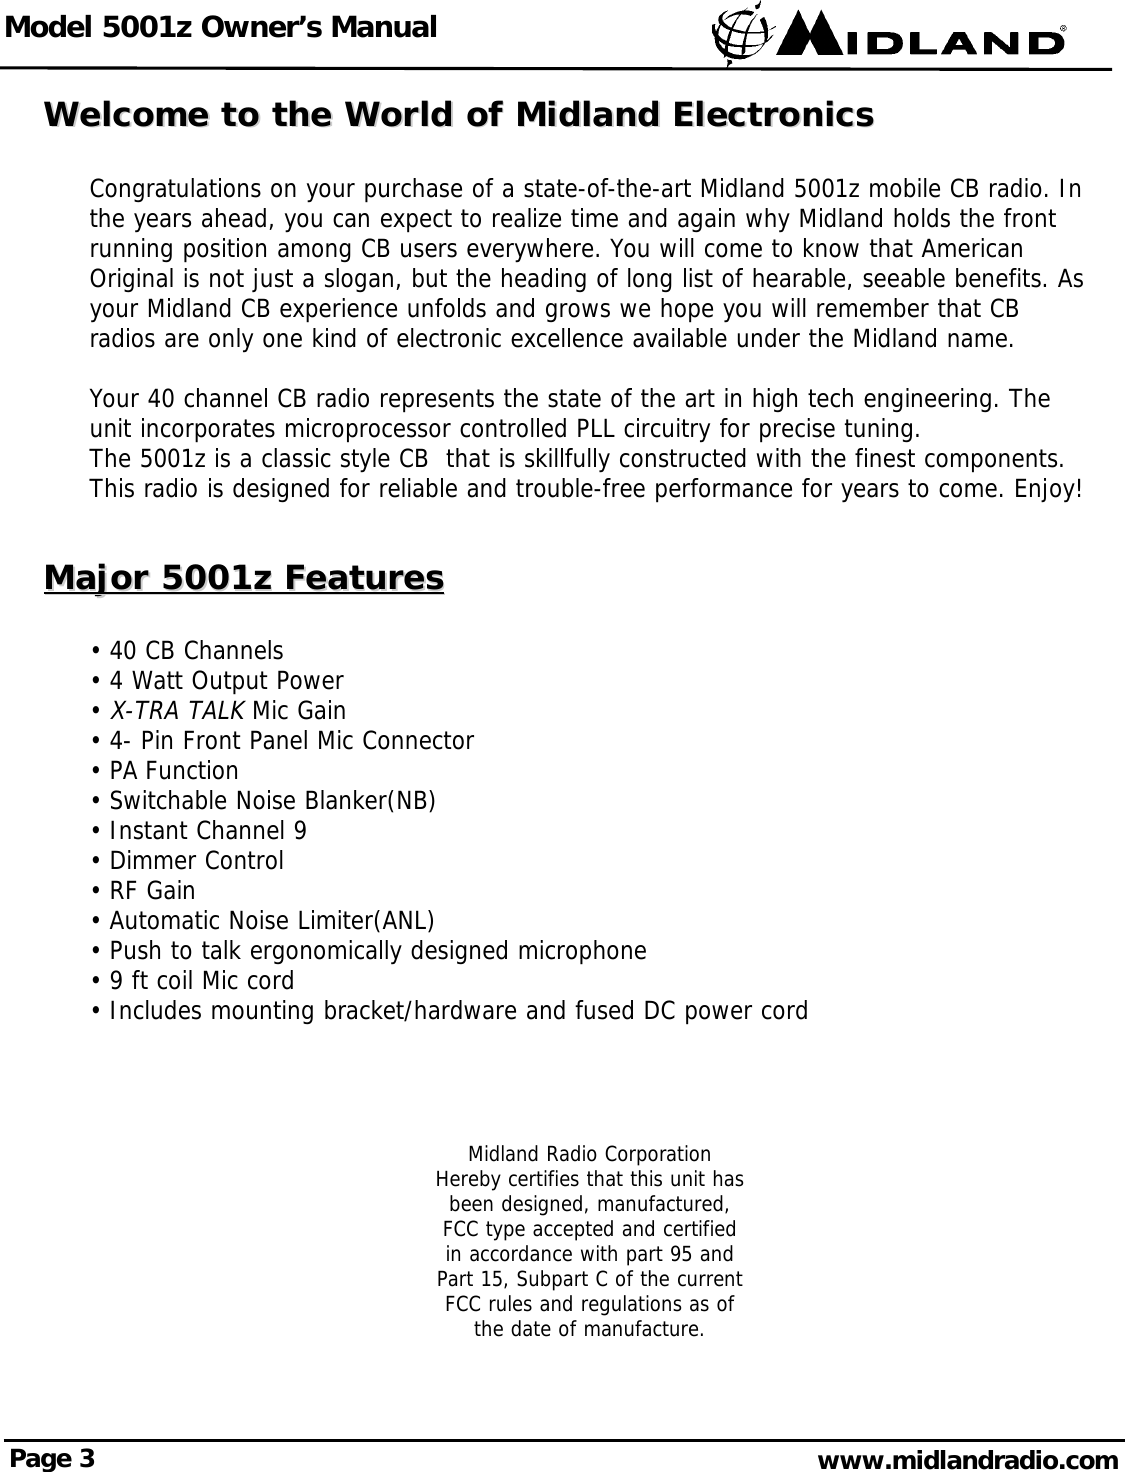 Model 5001z Owner’s ManualPage 3 www.midlandradio.comWelcome to the World of Midland ElectronicsWelcome to the World of Midland ElectronicsCongratulations on your purchase of a state-of-the-art Midland 5001z mobile CB radio. Inthe years ahead, you can expect to realize time and again why Midland holds the frontrunning position among CB users everywhere. You will come to know that AmericanOriginal is not just a slogan, but the heading of long list of hearable, seeable benefits. Asyour Midland CB experience unfolds and grows we hope you will remember that CBradios are only one kind of electronic excellence available under the Midland name.Your 40 channel CB radio represents the state of the art in high tech engineering. Theunit incorporates microprocessor controlled PLL circuitry for precise tuning.The 5001z is a classic style CB  that is skillfully constructed with the finest components.This radio is designed for reliable and trouble-free performance for years to come. Enjoy!Major 5001z FeaturesMajor 5001z Features• 40 CB Channels• 4 Watt Output Power• X-TRA TALKMic Gain• 4- Pin Front Panel Mic Connector • PA Function • Switchable Noise Blanker(NB)• Instant Channel 9• Dimmer Control• RF Gain• Automatic Noise Limiter(ANL)• Push to talk ergonomically designed microphone• 9 ft coil Mic cord• Includes mounting bracket/hardware and fused DC power cord Midland Radio CorporationHereby certifies that this unit hasbeen designed, manufactured, FCC type accepted and certifiedin accordance with part 95 and Part 15, Subpart C of the current FCC rules and regulations as ofthe date of manufacture.